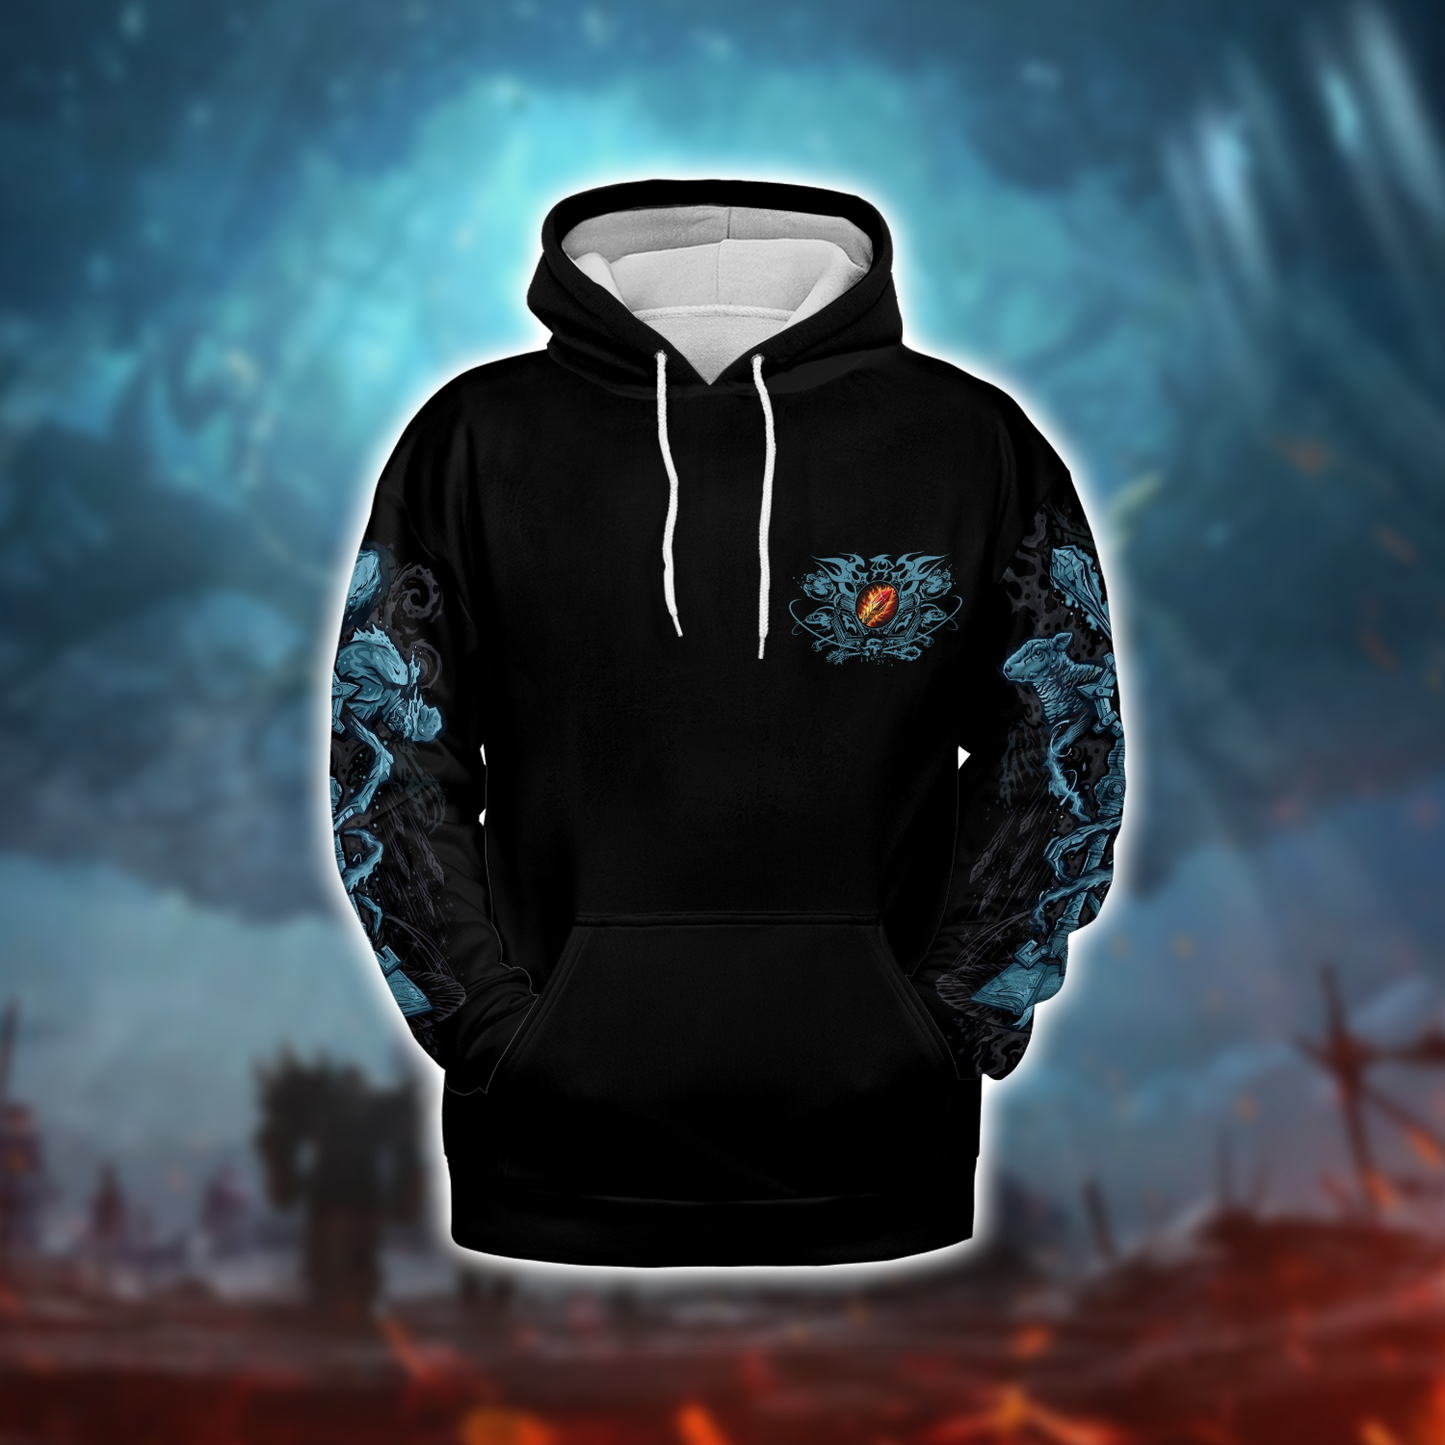 Fire Mage WoW Class Guide V1 AOP Hoodie